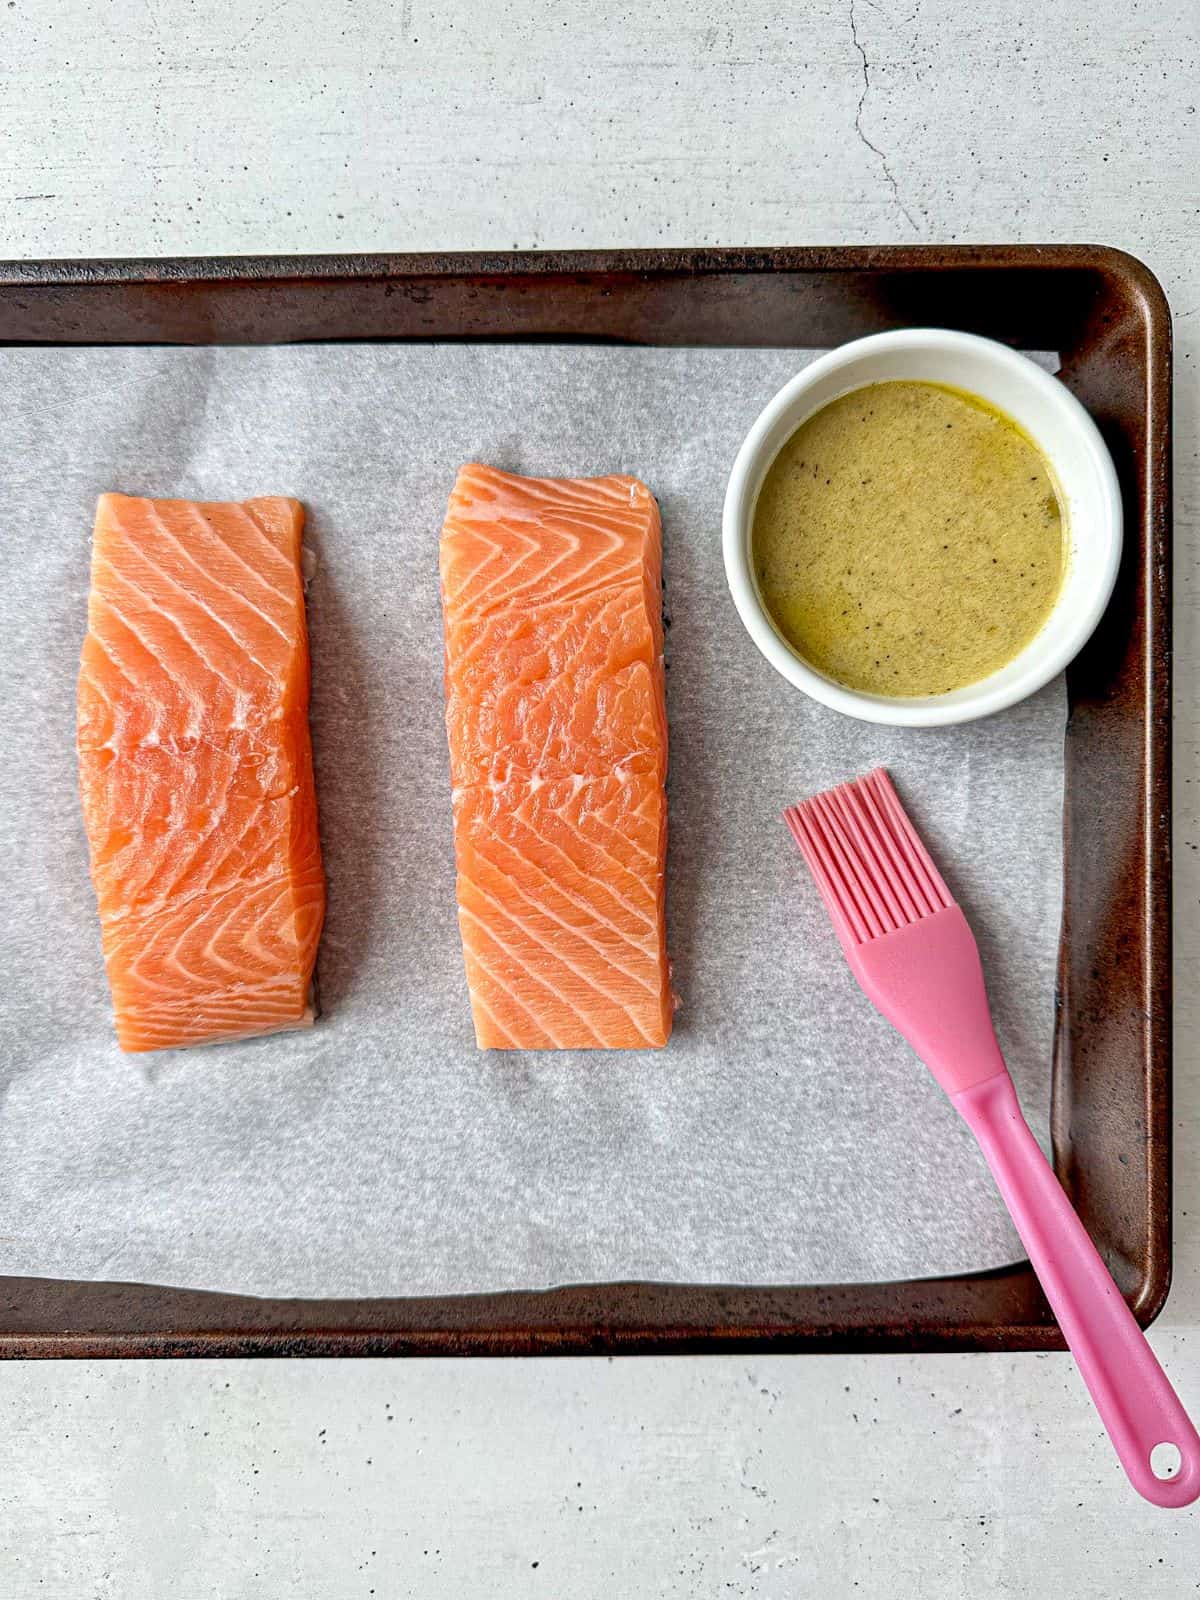 Two salmon fillets on a baking sheet covered with parchment paper. A small bowl of marinade and a pastry brush are off to the side.